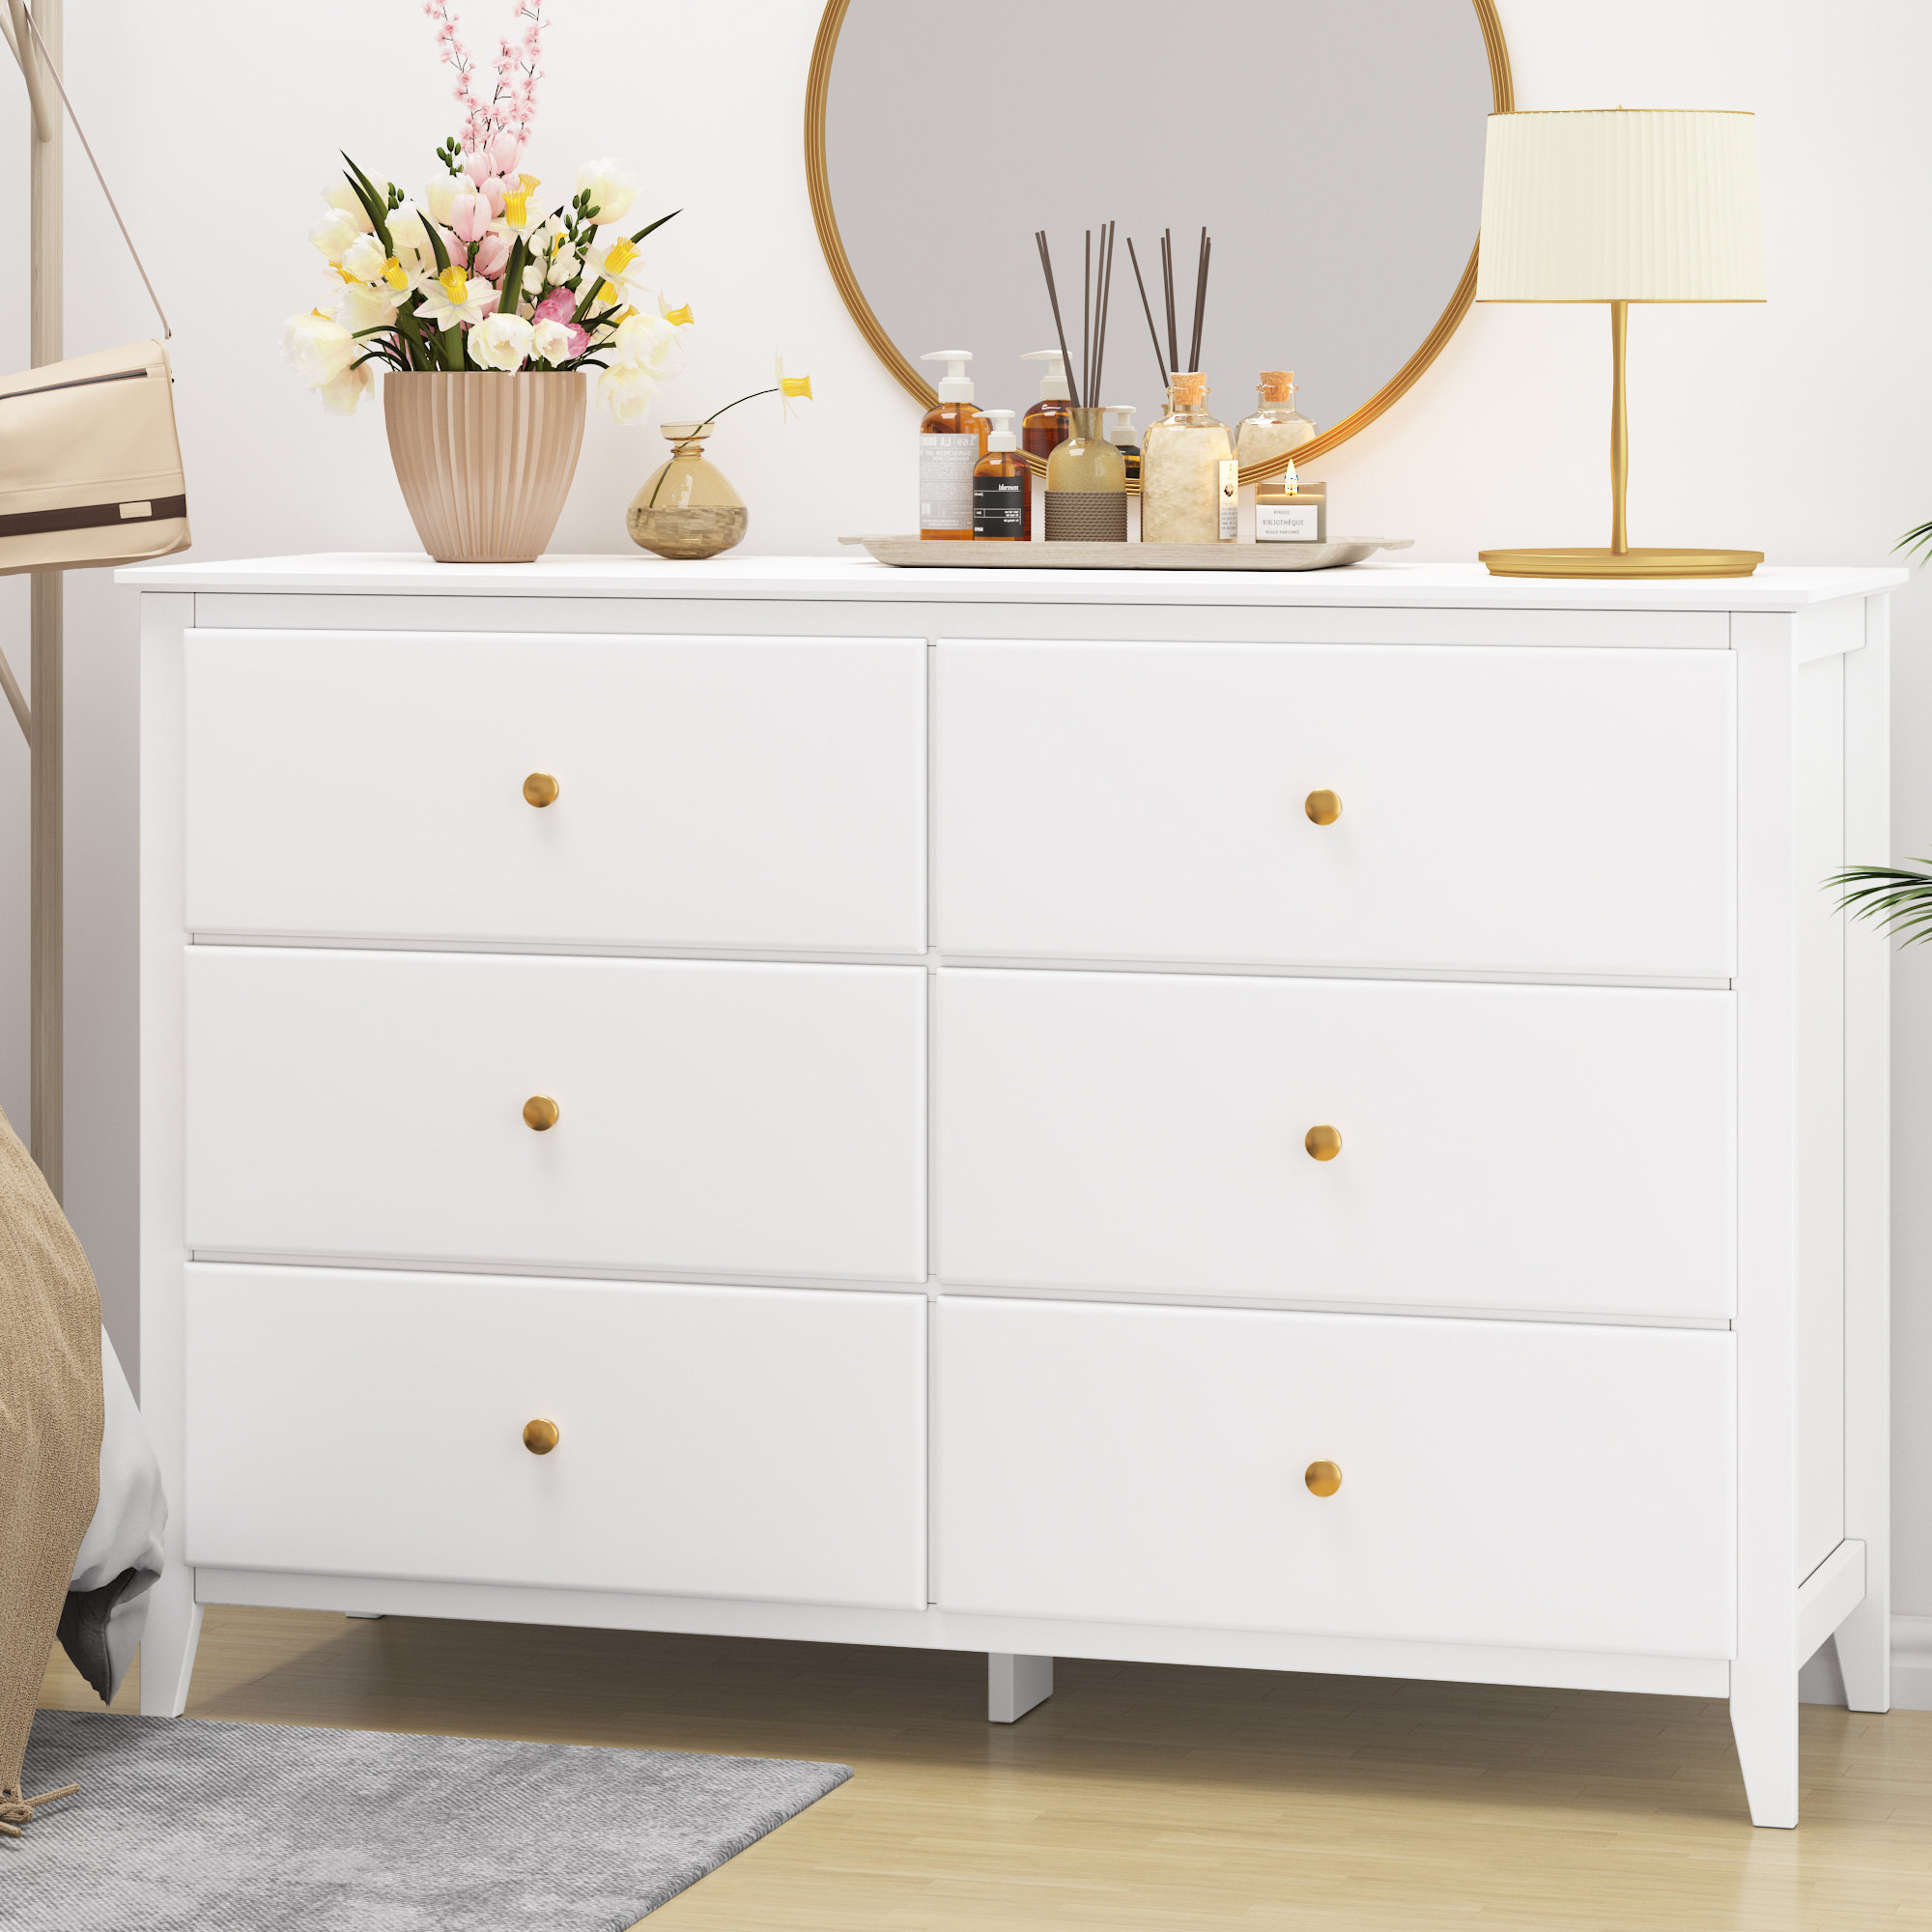 6 Drawer Double Fabric Dresser for Bedroom, Nursery - Lifewit